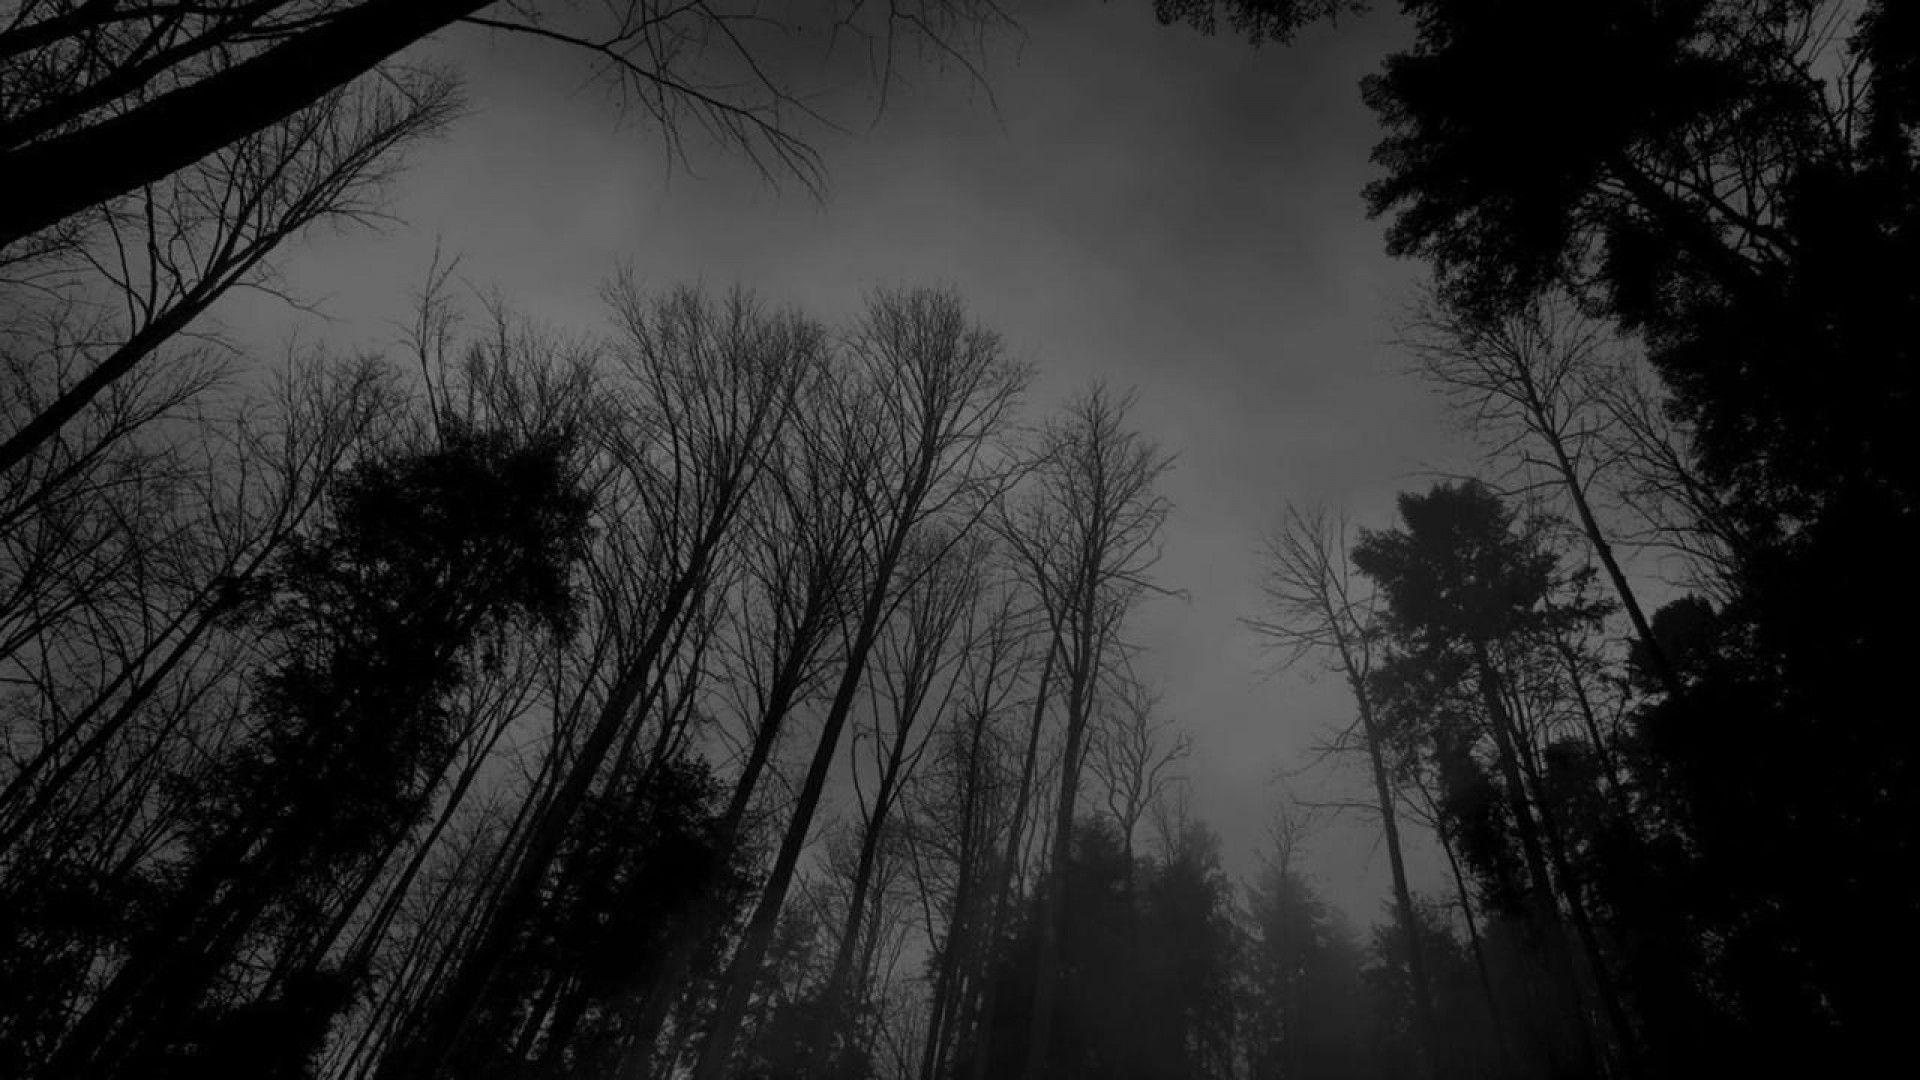 Wallpaper.wiki Black And White Forest Full HD Wallpaper PIC